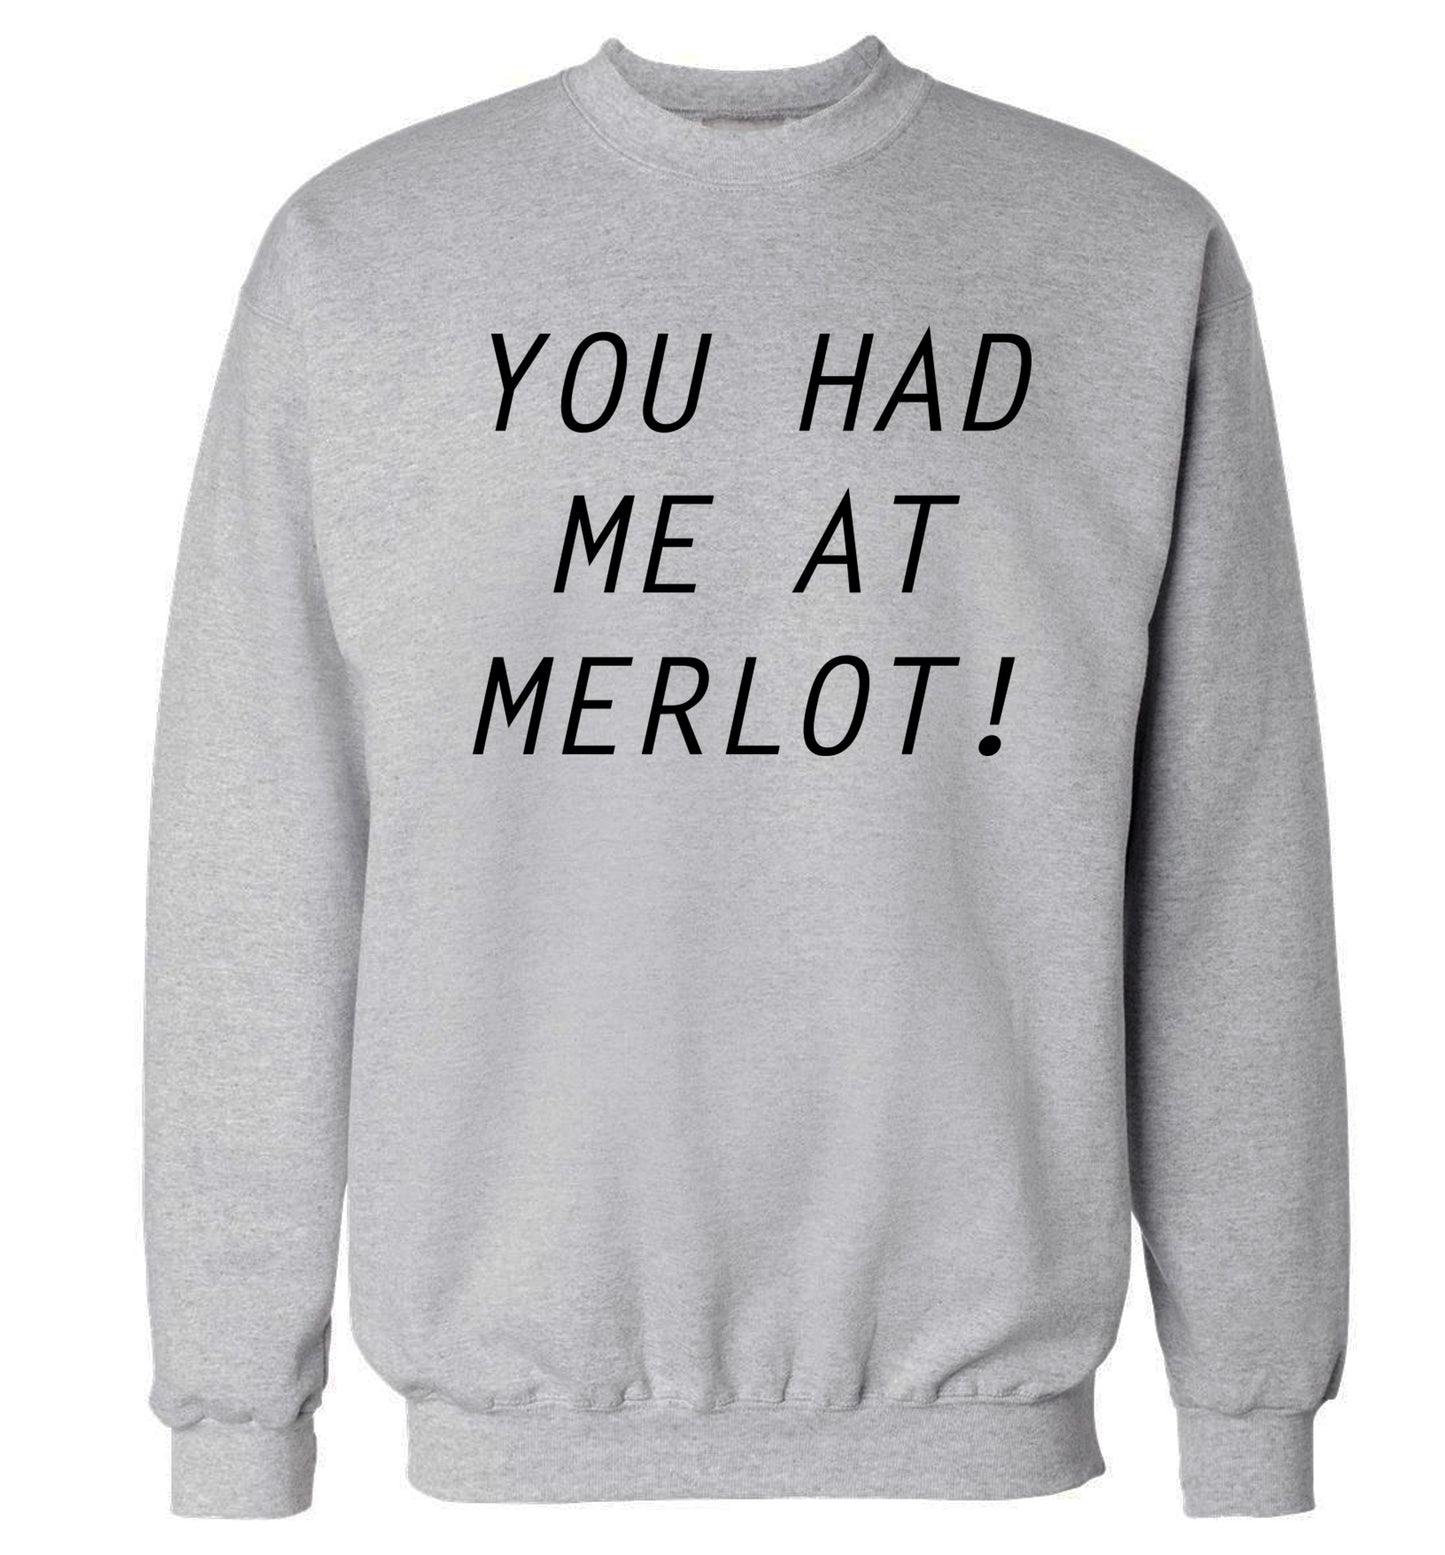 You had me at merlot Adult's unisex grey Sweater 2XL